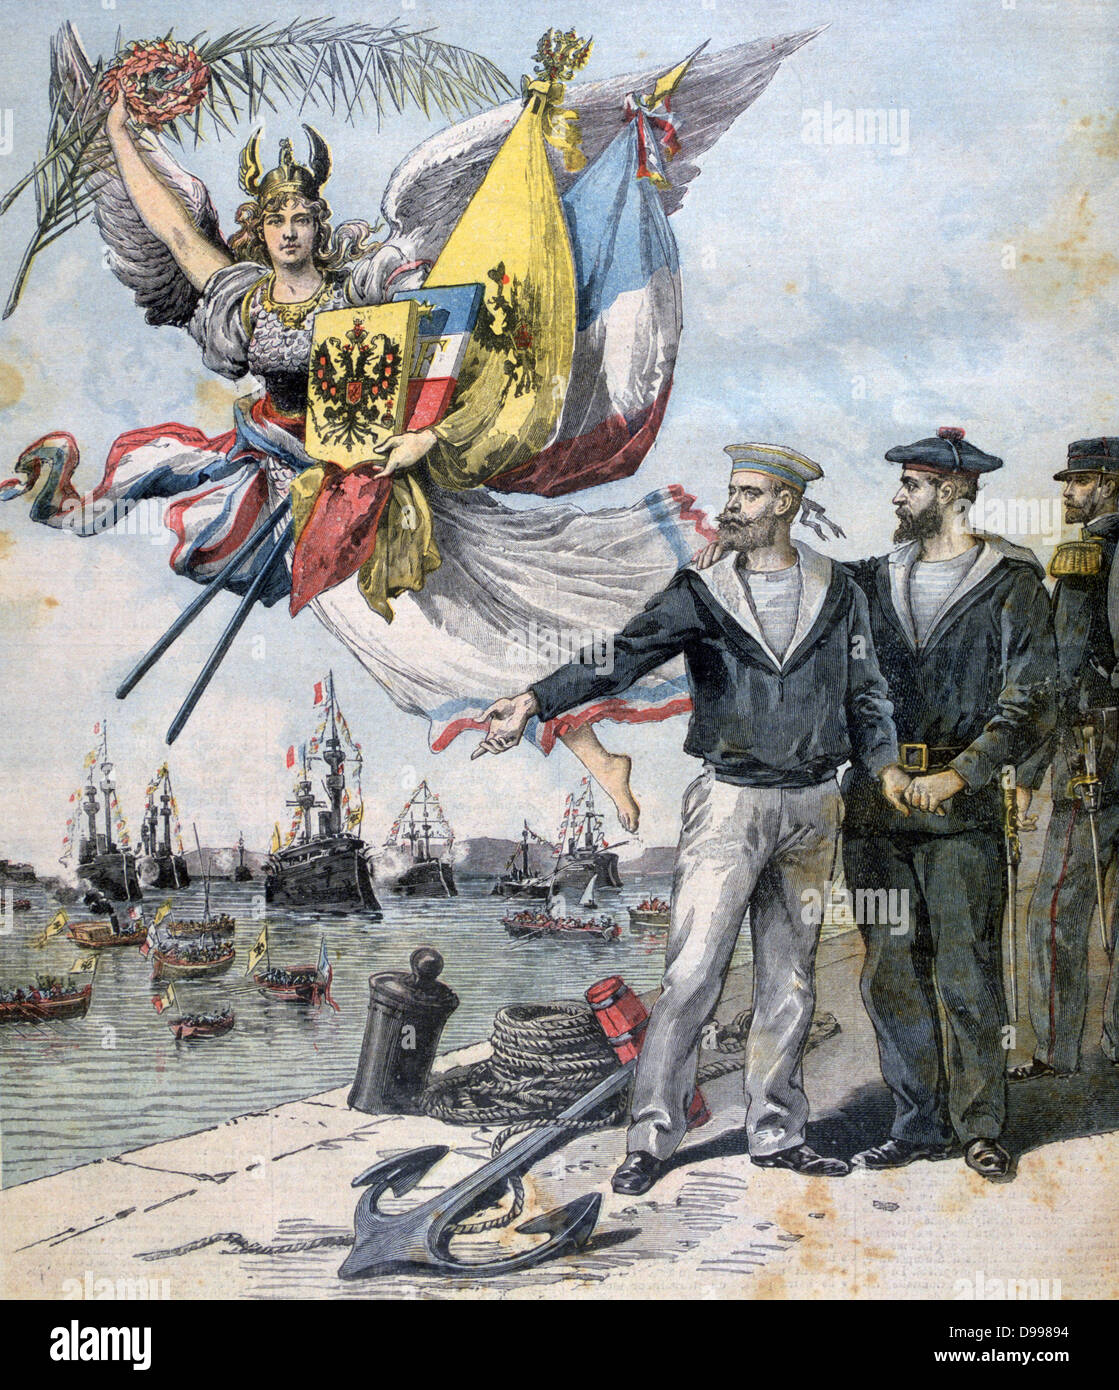 Franco-Russian Alliance: French and Russian sailors holding hands in brotherly entente  during the visit of the Russian Mediterranean Fleet to the French naval port of Toulon. From 'Le Petit Journal', Paris, 30 September 1893. Stock Photo